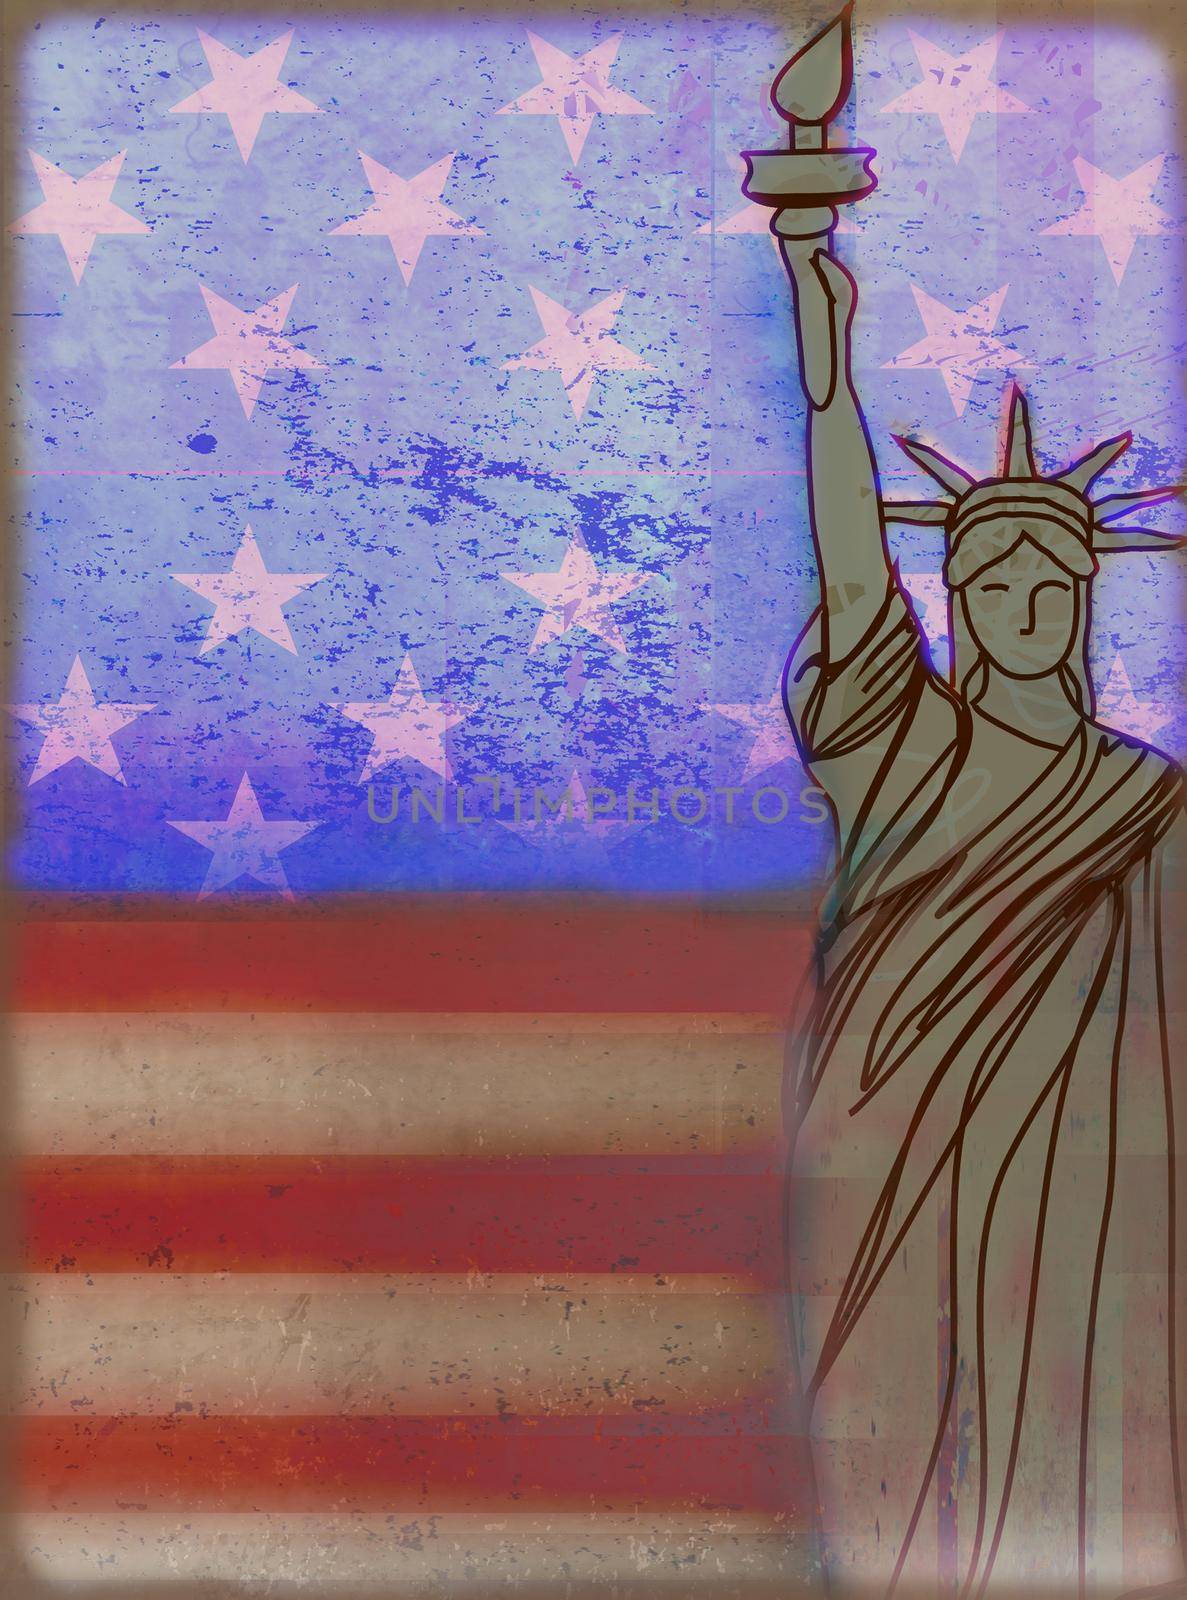 Grunge illustration of the american flag and Statue of liberty by JackyBrown